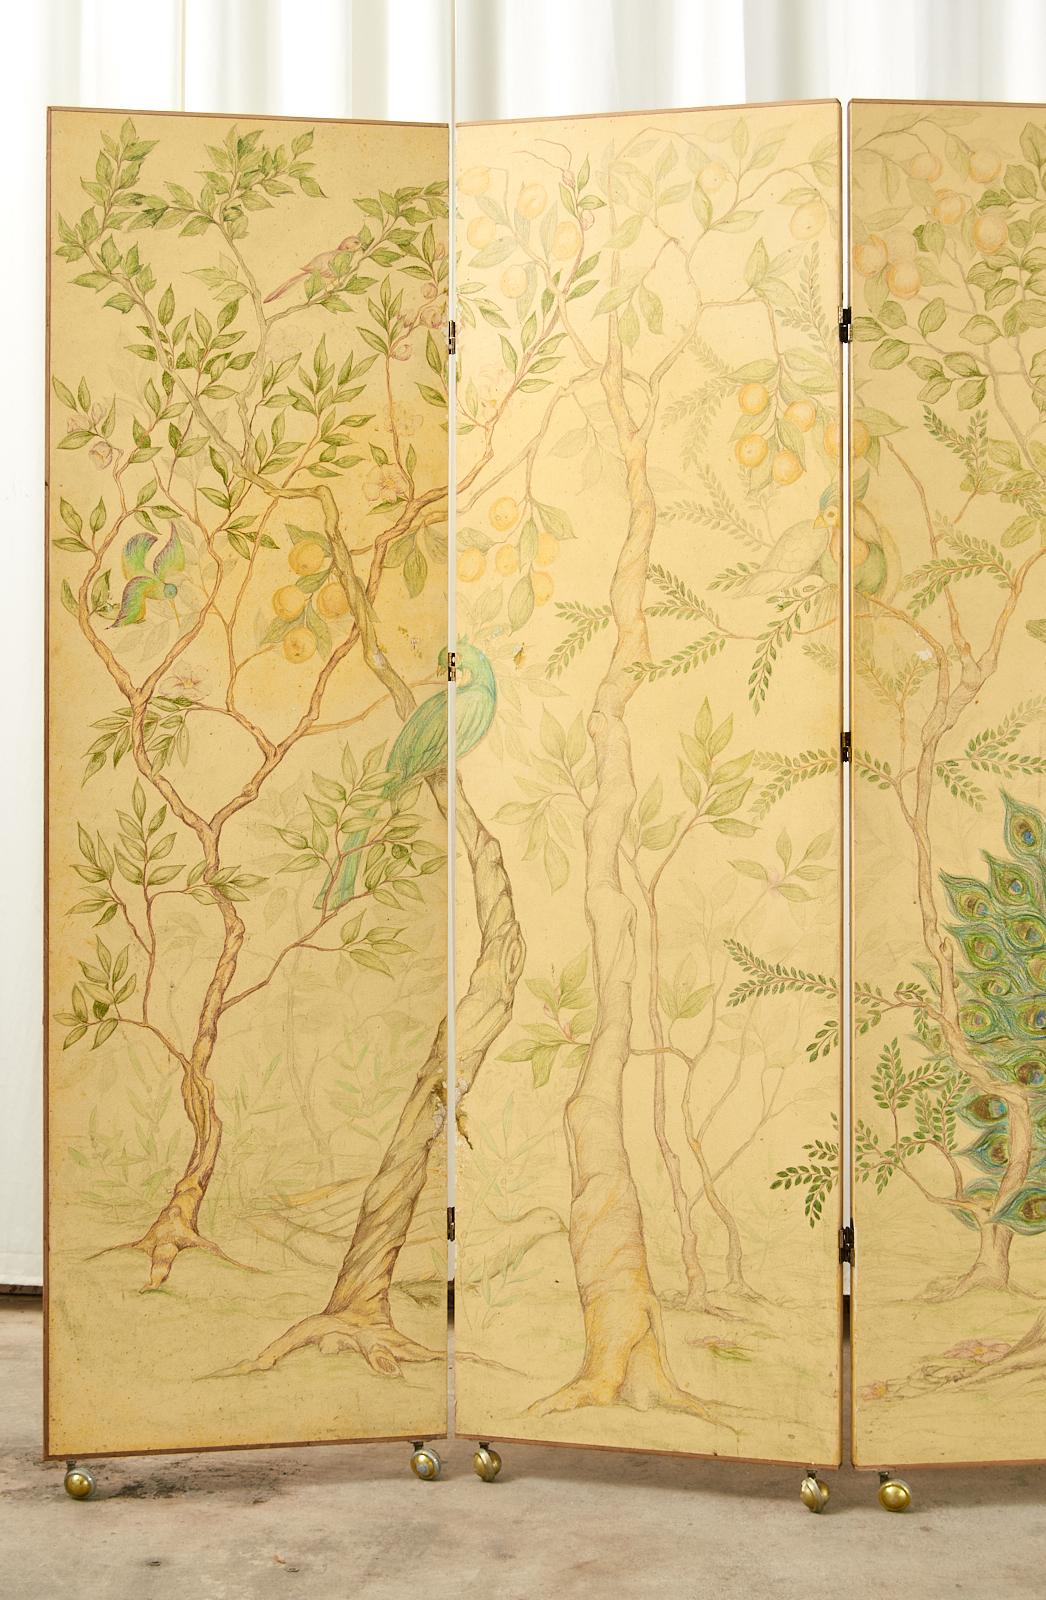 Exquisite English five-panel double sided screen depicting a flora and fauna painted chinoiserie landscape with a peacock. The opposite side depicts a country English landscape equestrian scene. Constructed from painted wooden panels conjoined with